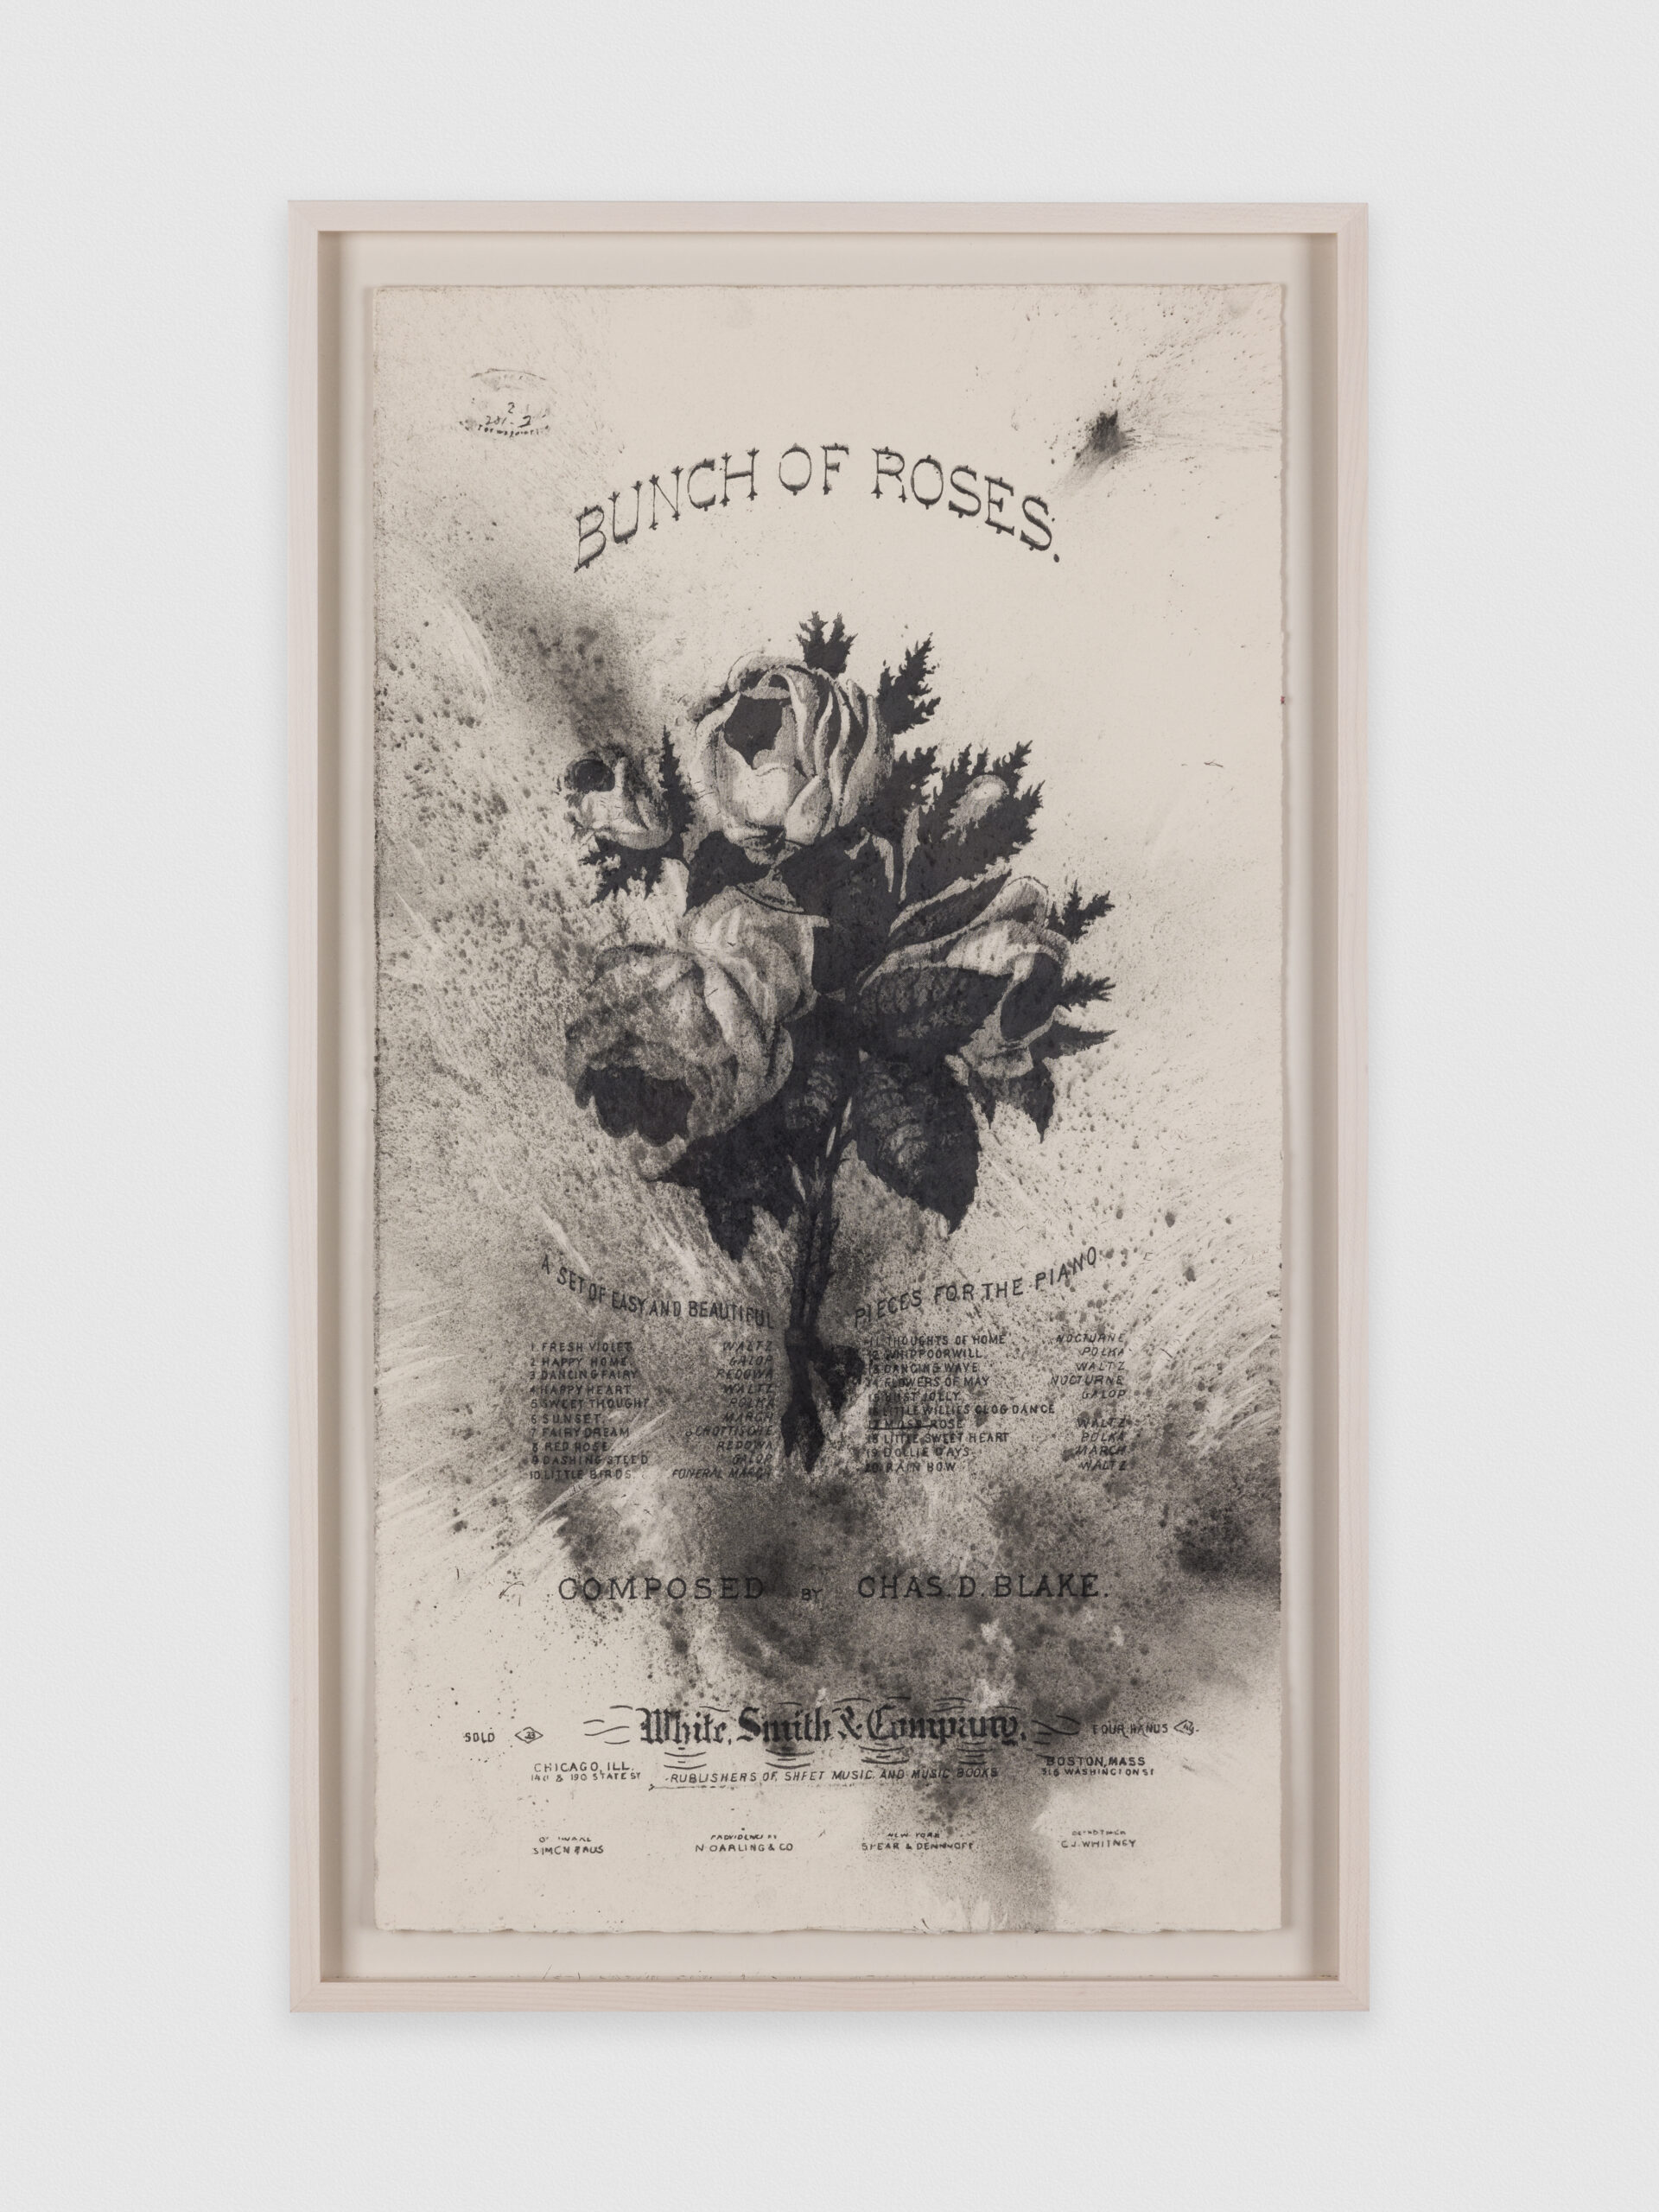 A vintage cover of sheet music, featuring roses and the piece title, Bunch of roses. The paper is aged and smeared with graphite and charcoal.